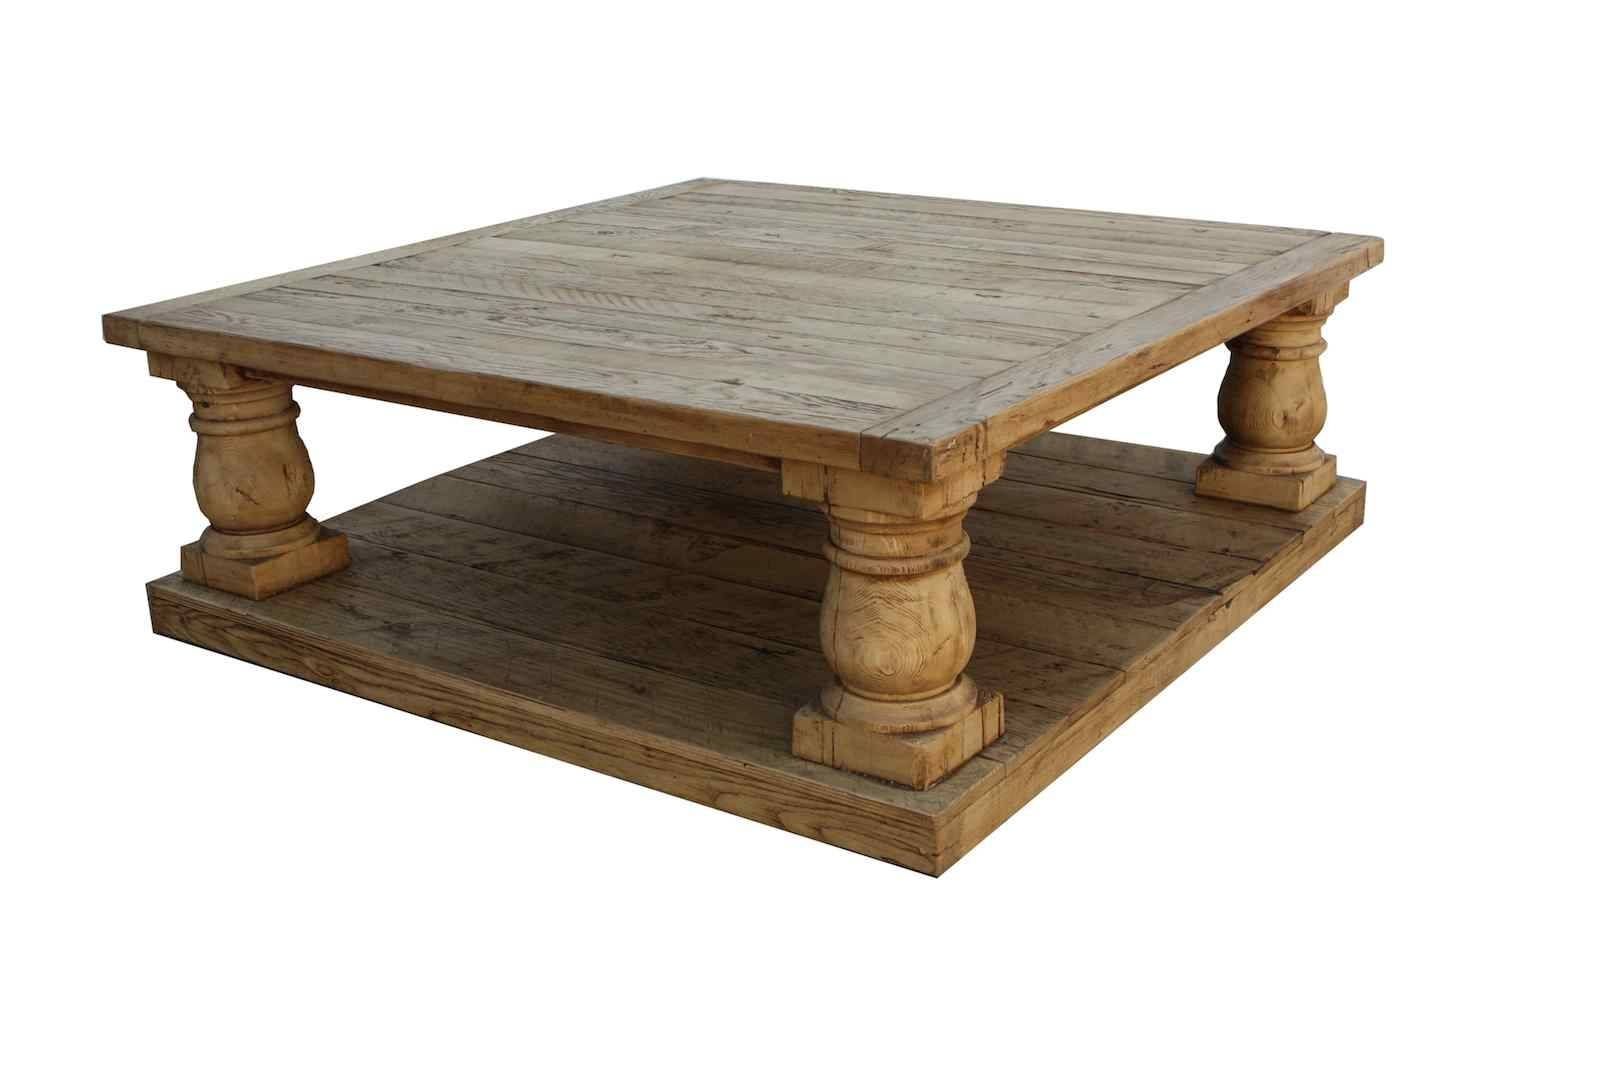 Image Reclaimed Coffee Table Design – Rustic Reclaimed Wood Coffee Within Chunky Wood Coffee Tables (View 5 of 30)